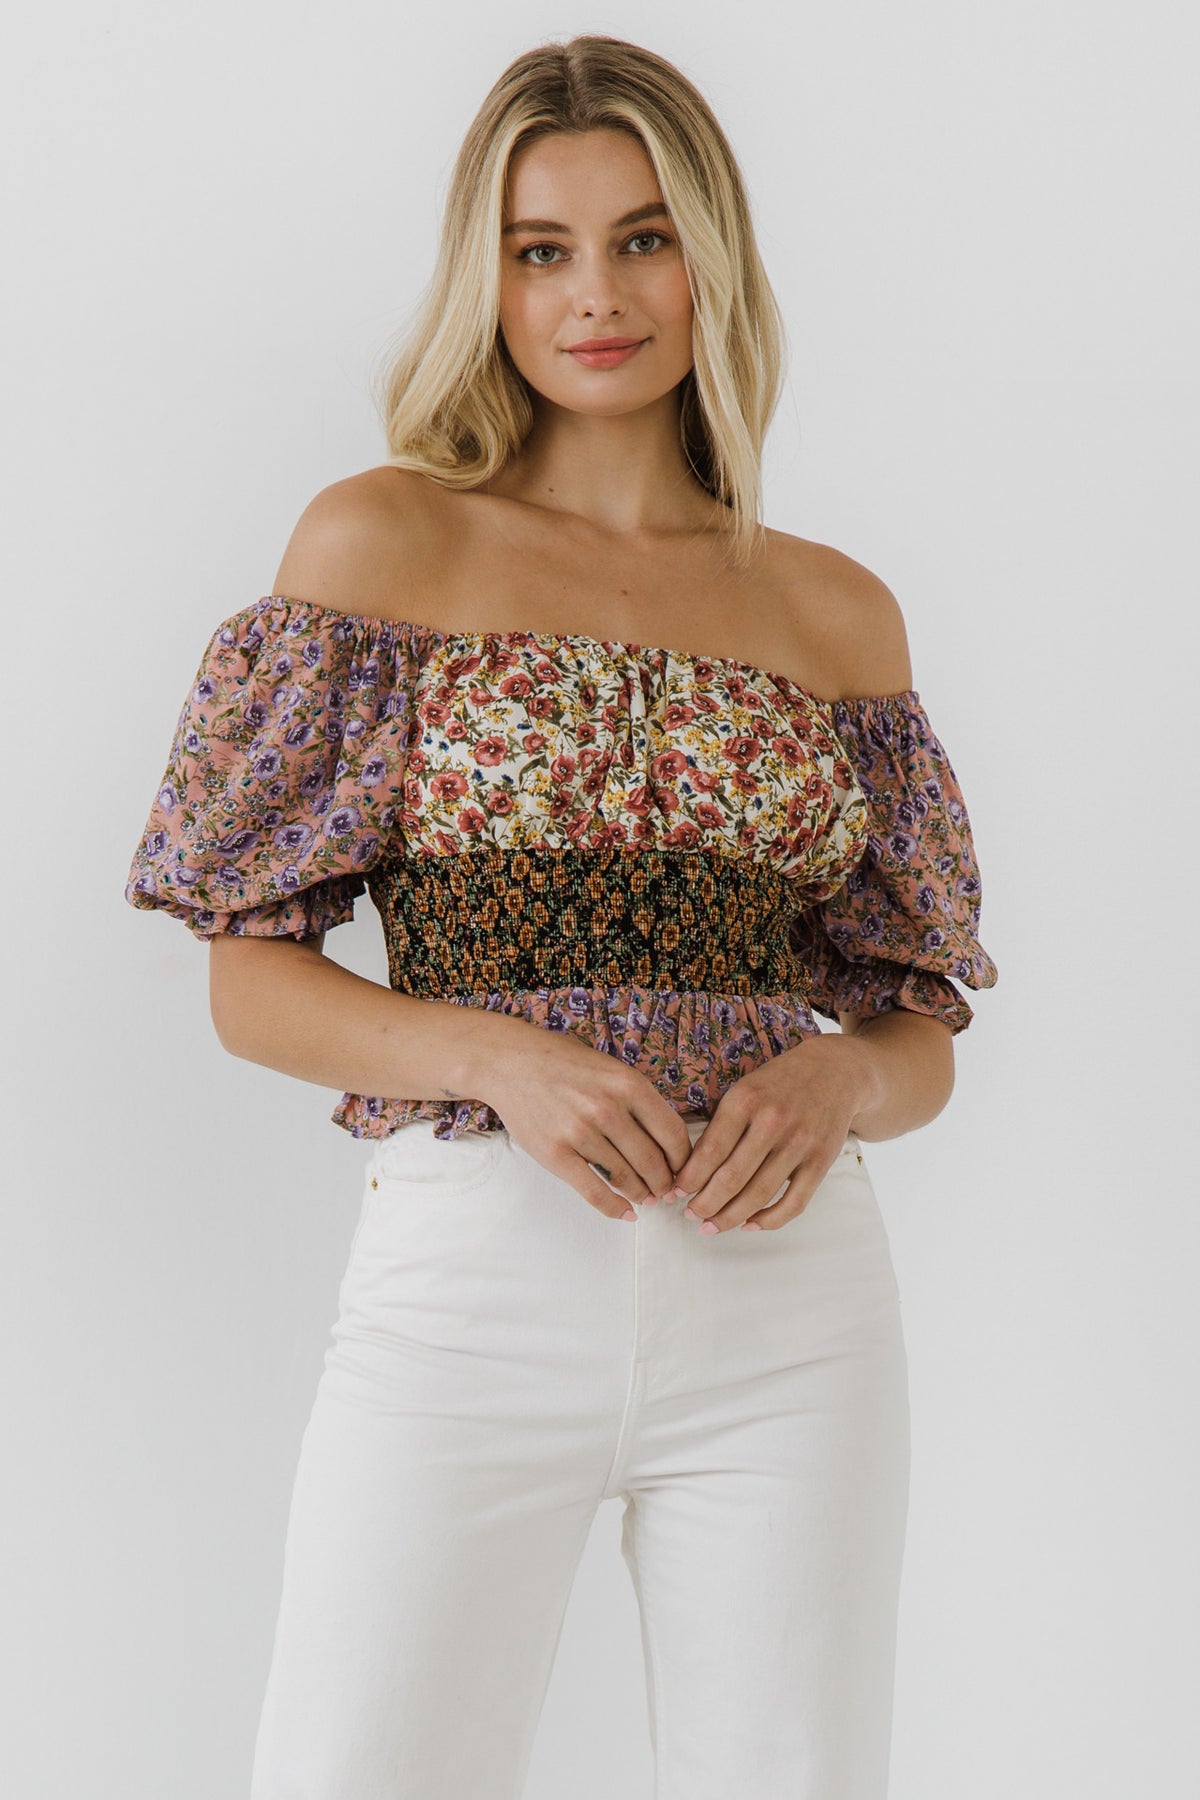 FREE THE ROSES - Floral Multi Color Top - TOPS available at Objectrare